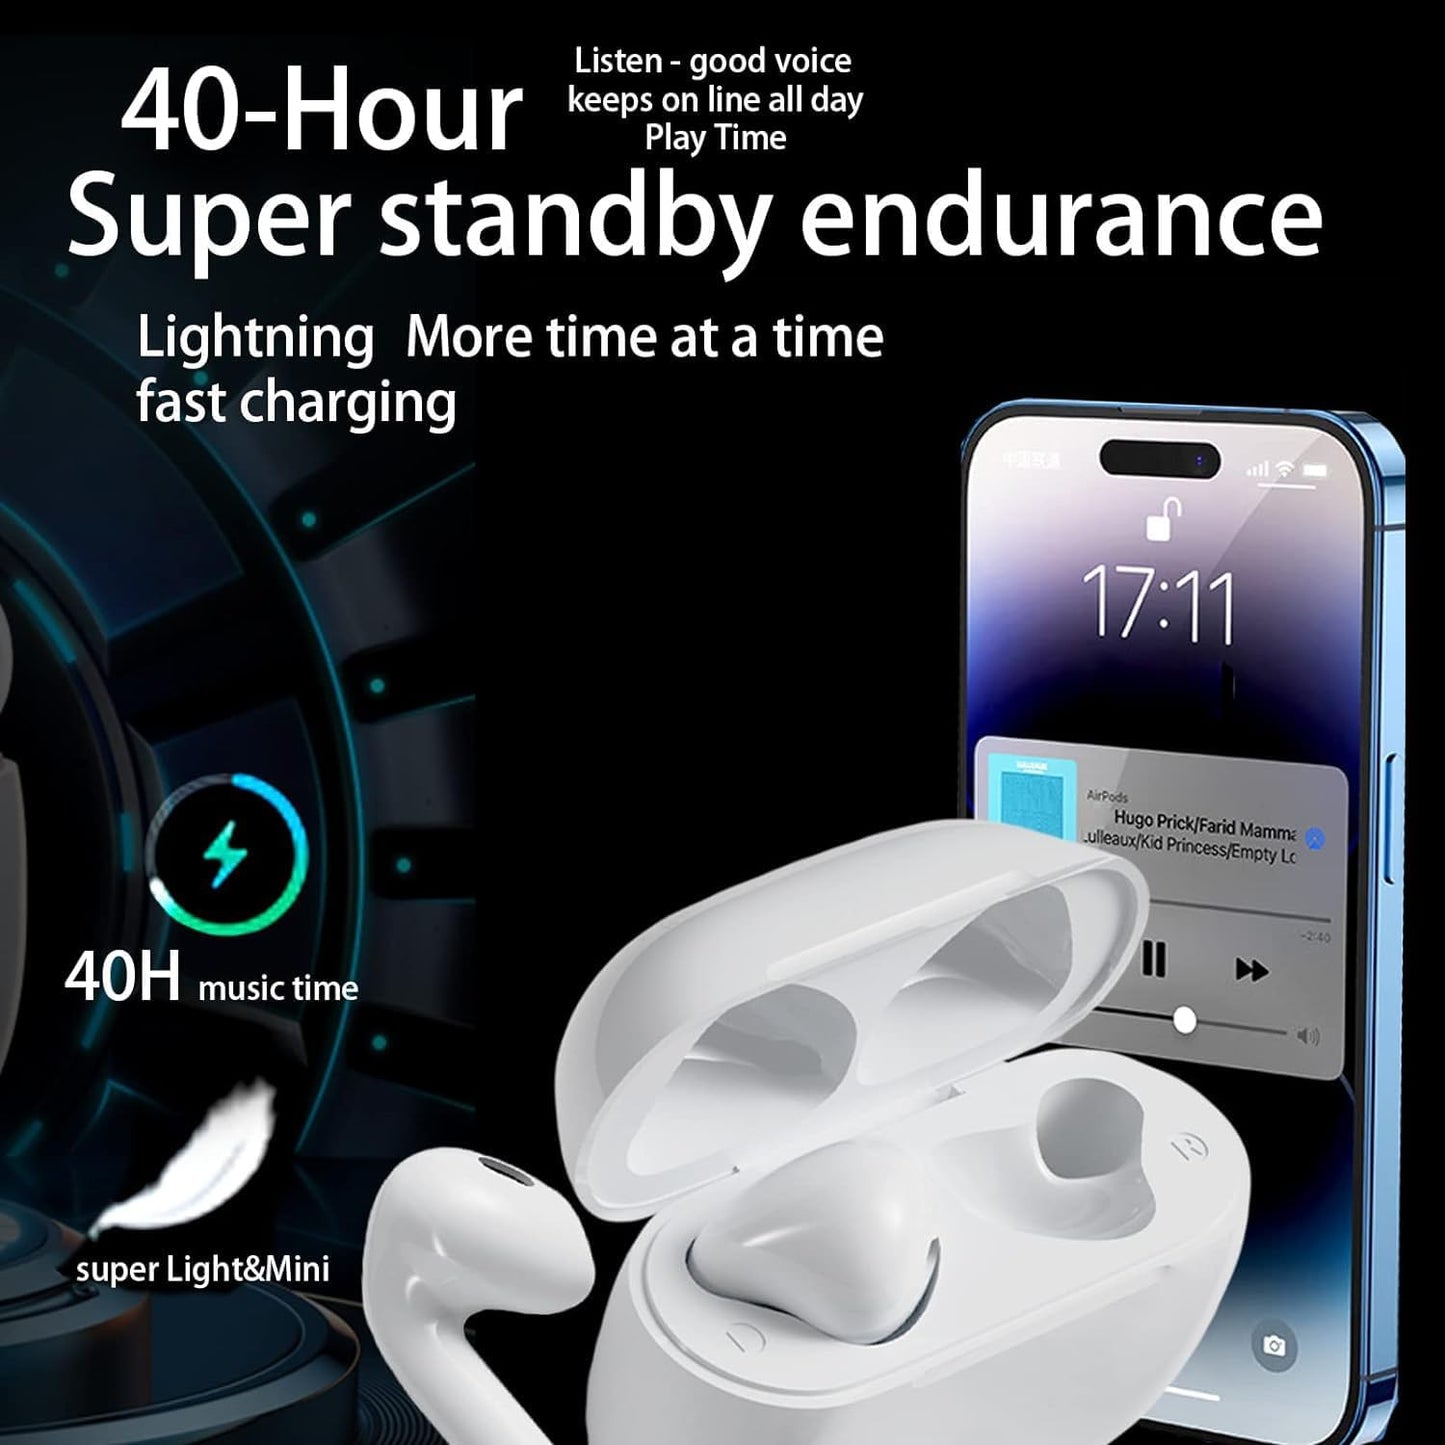 Wireless Earbuds for AirPods,Bluetooth 5.3 in Ear Headphones,40H Playtime Wireless Bluetooth Earphones with Noise Cancelling Mic, HiFi Stereo Deep Bass Earbuds IPX8 Waterproof for iPhone/Android